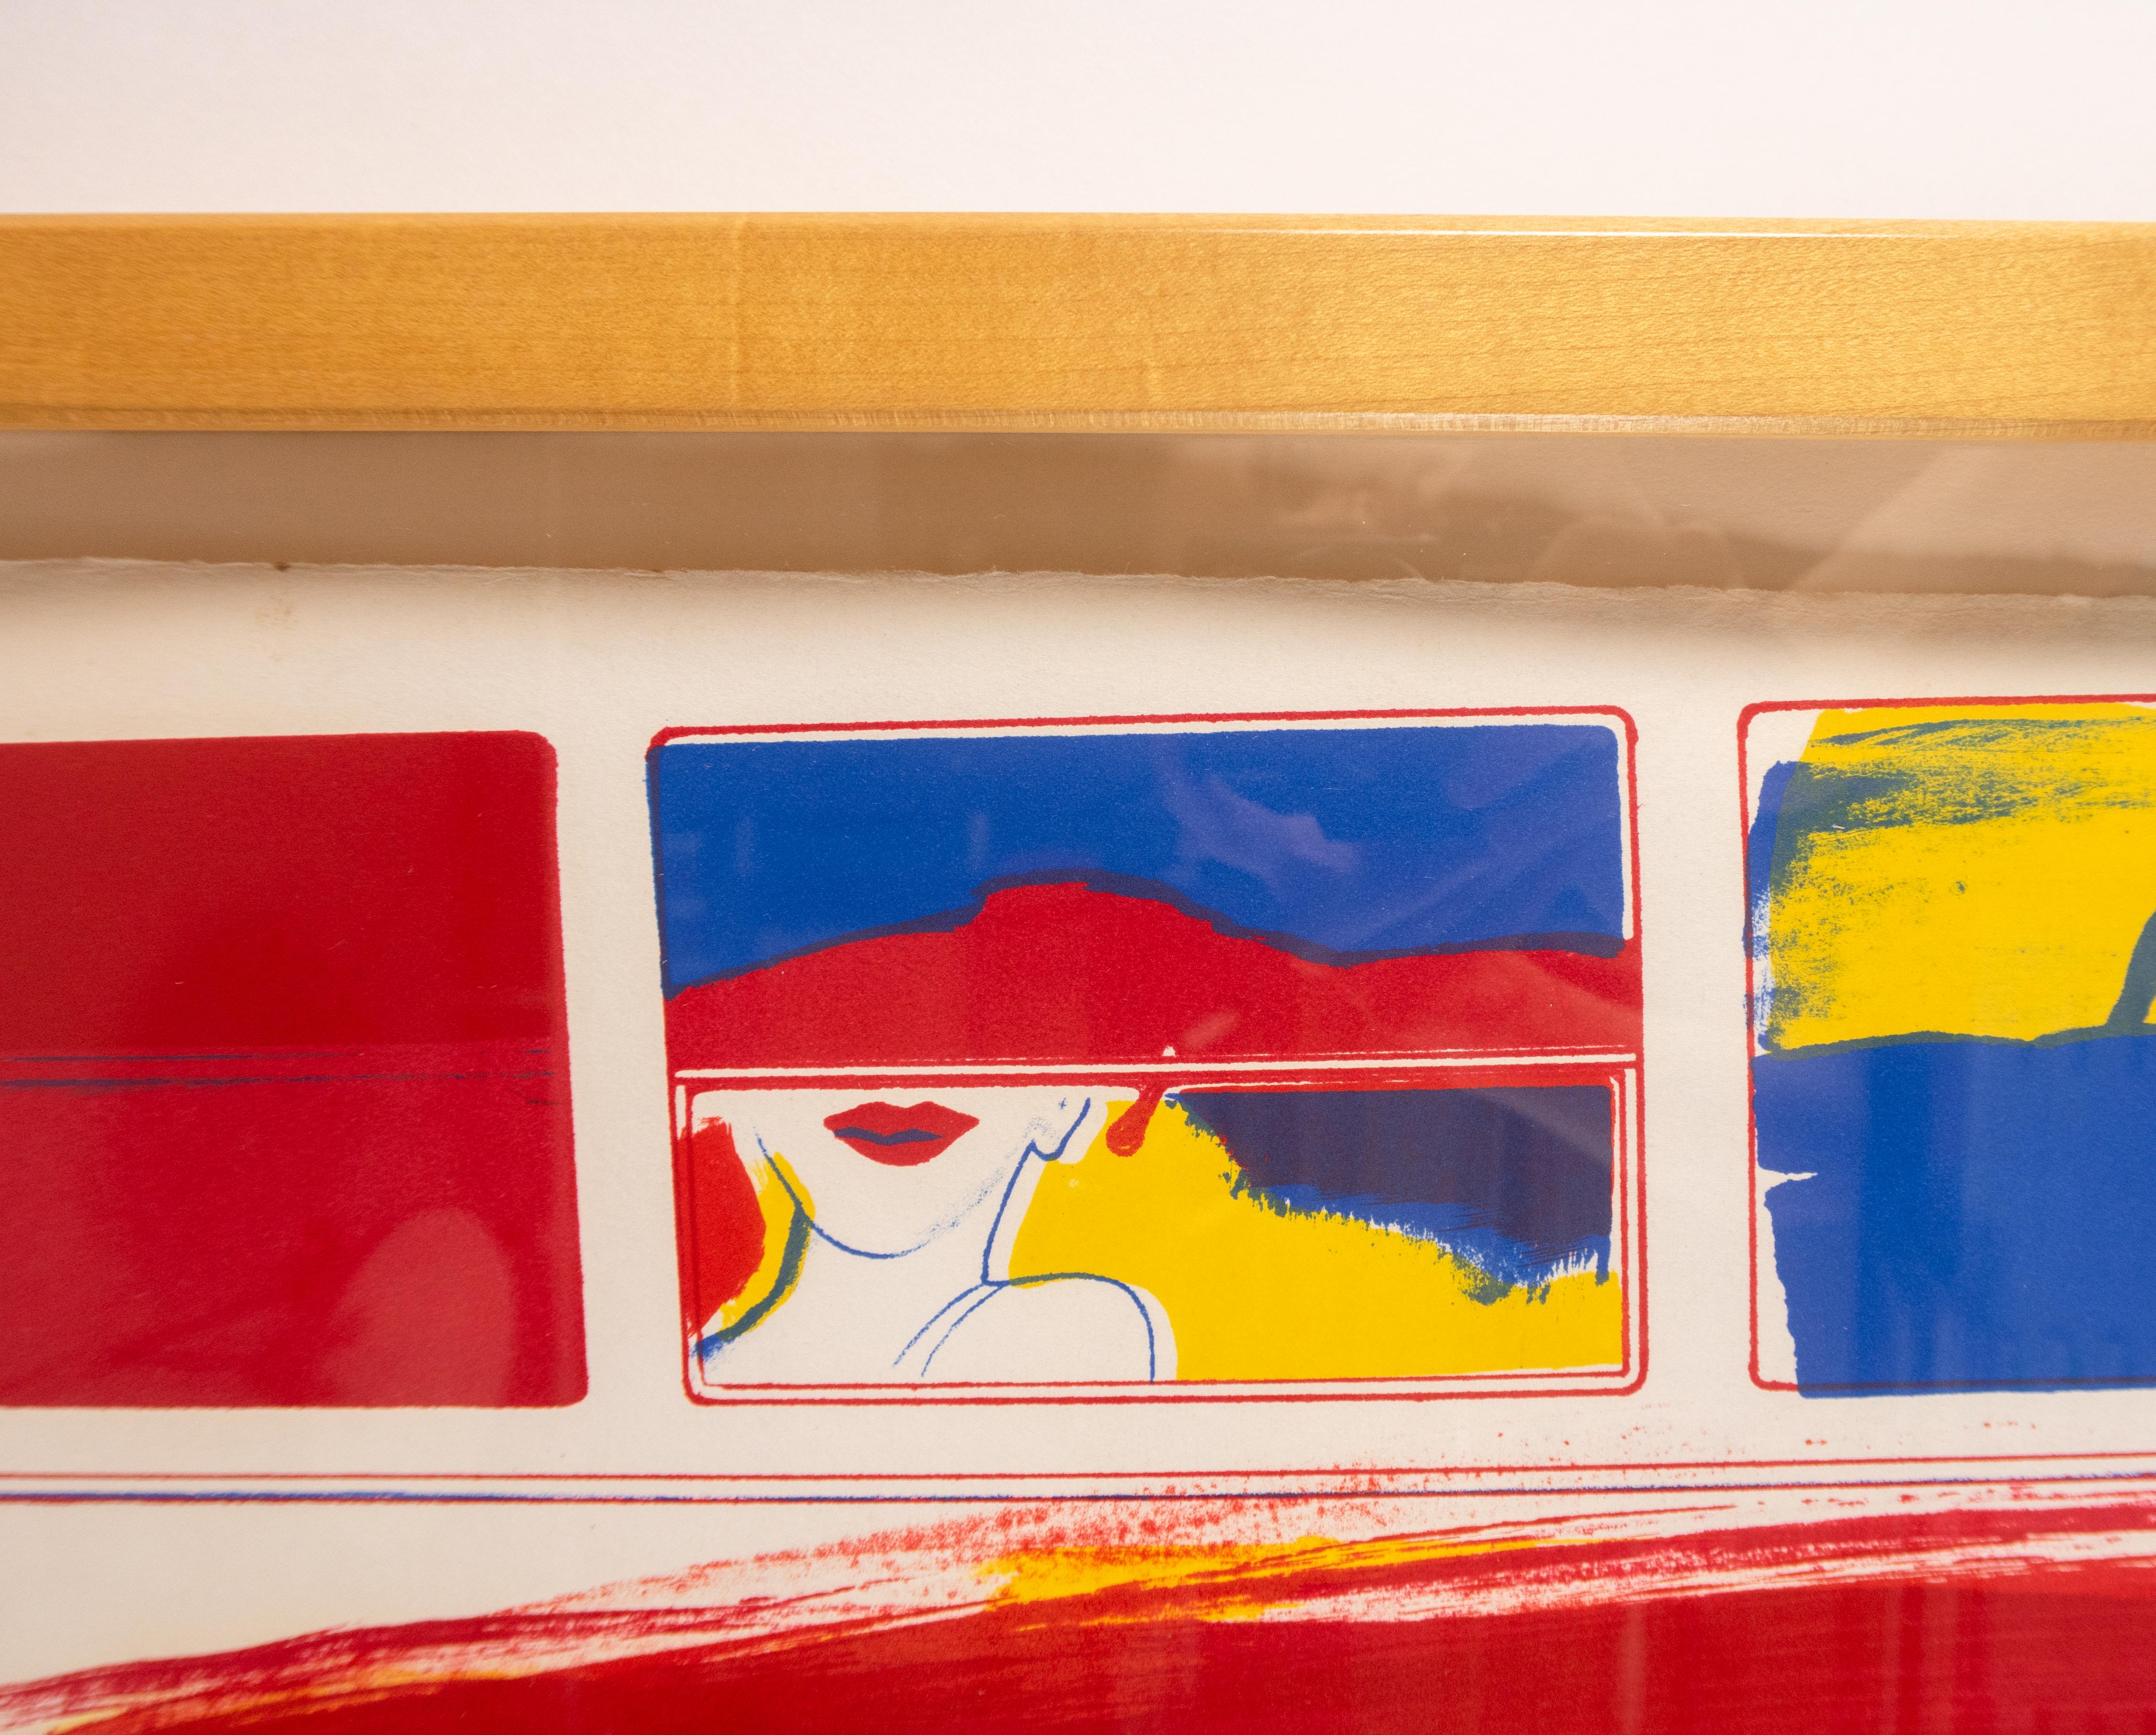 Large Bus by Allen Jones classic British 1960s pop art in bright primary colors  For Sale 4